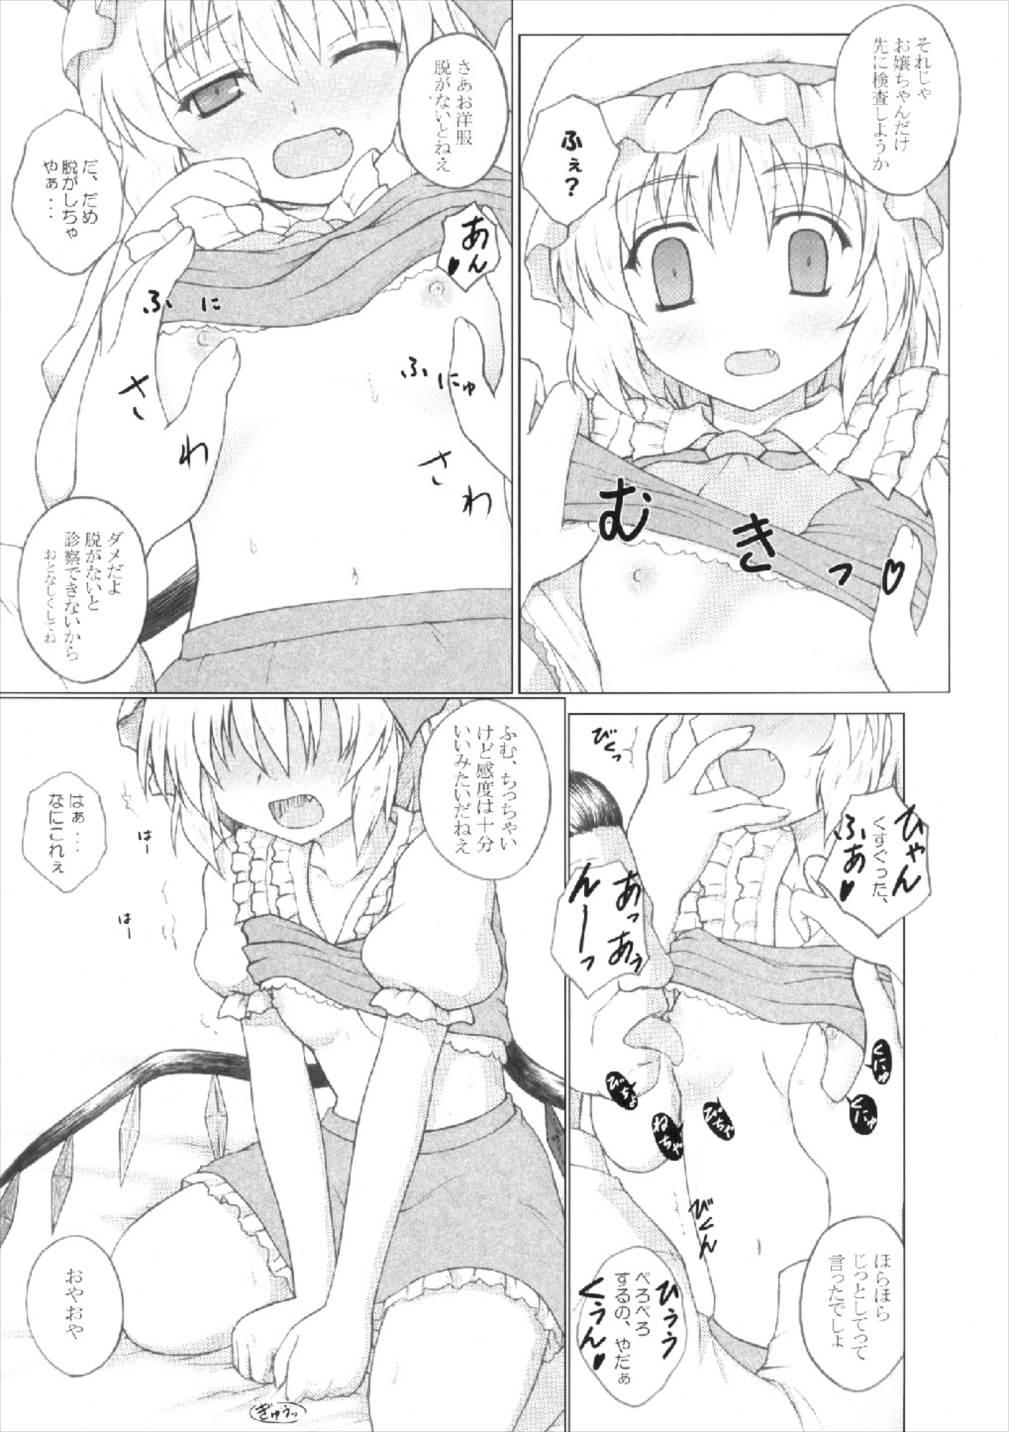 Girl Girl DOUBLE ACTION!! - Touhou project Bizarre - Page 8